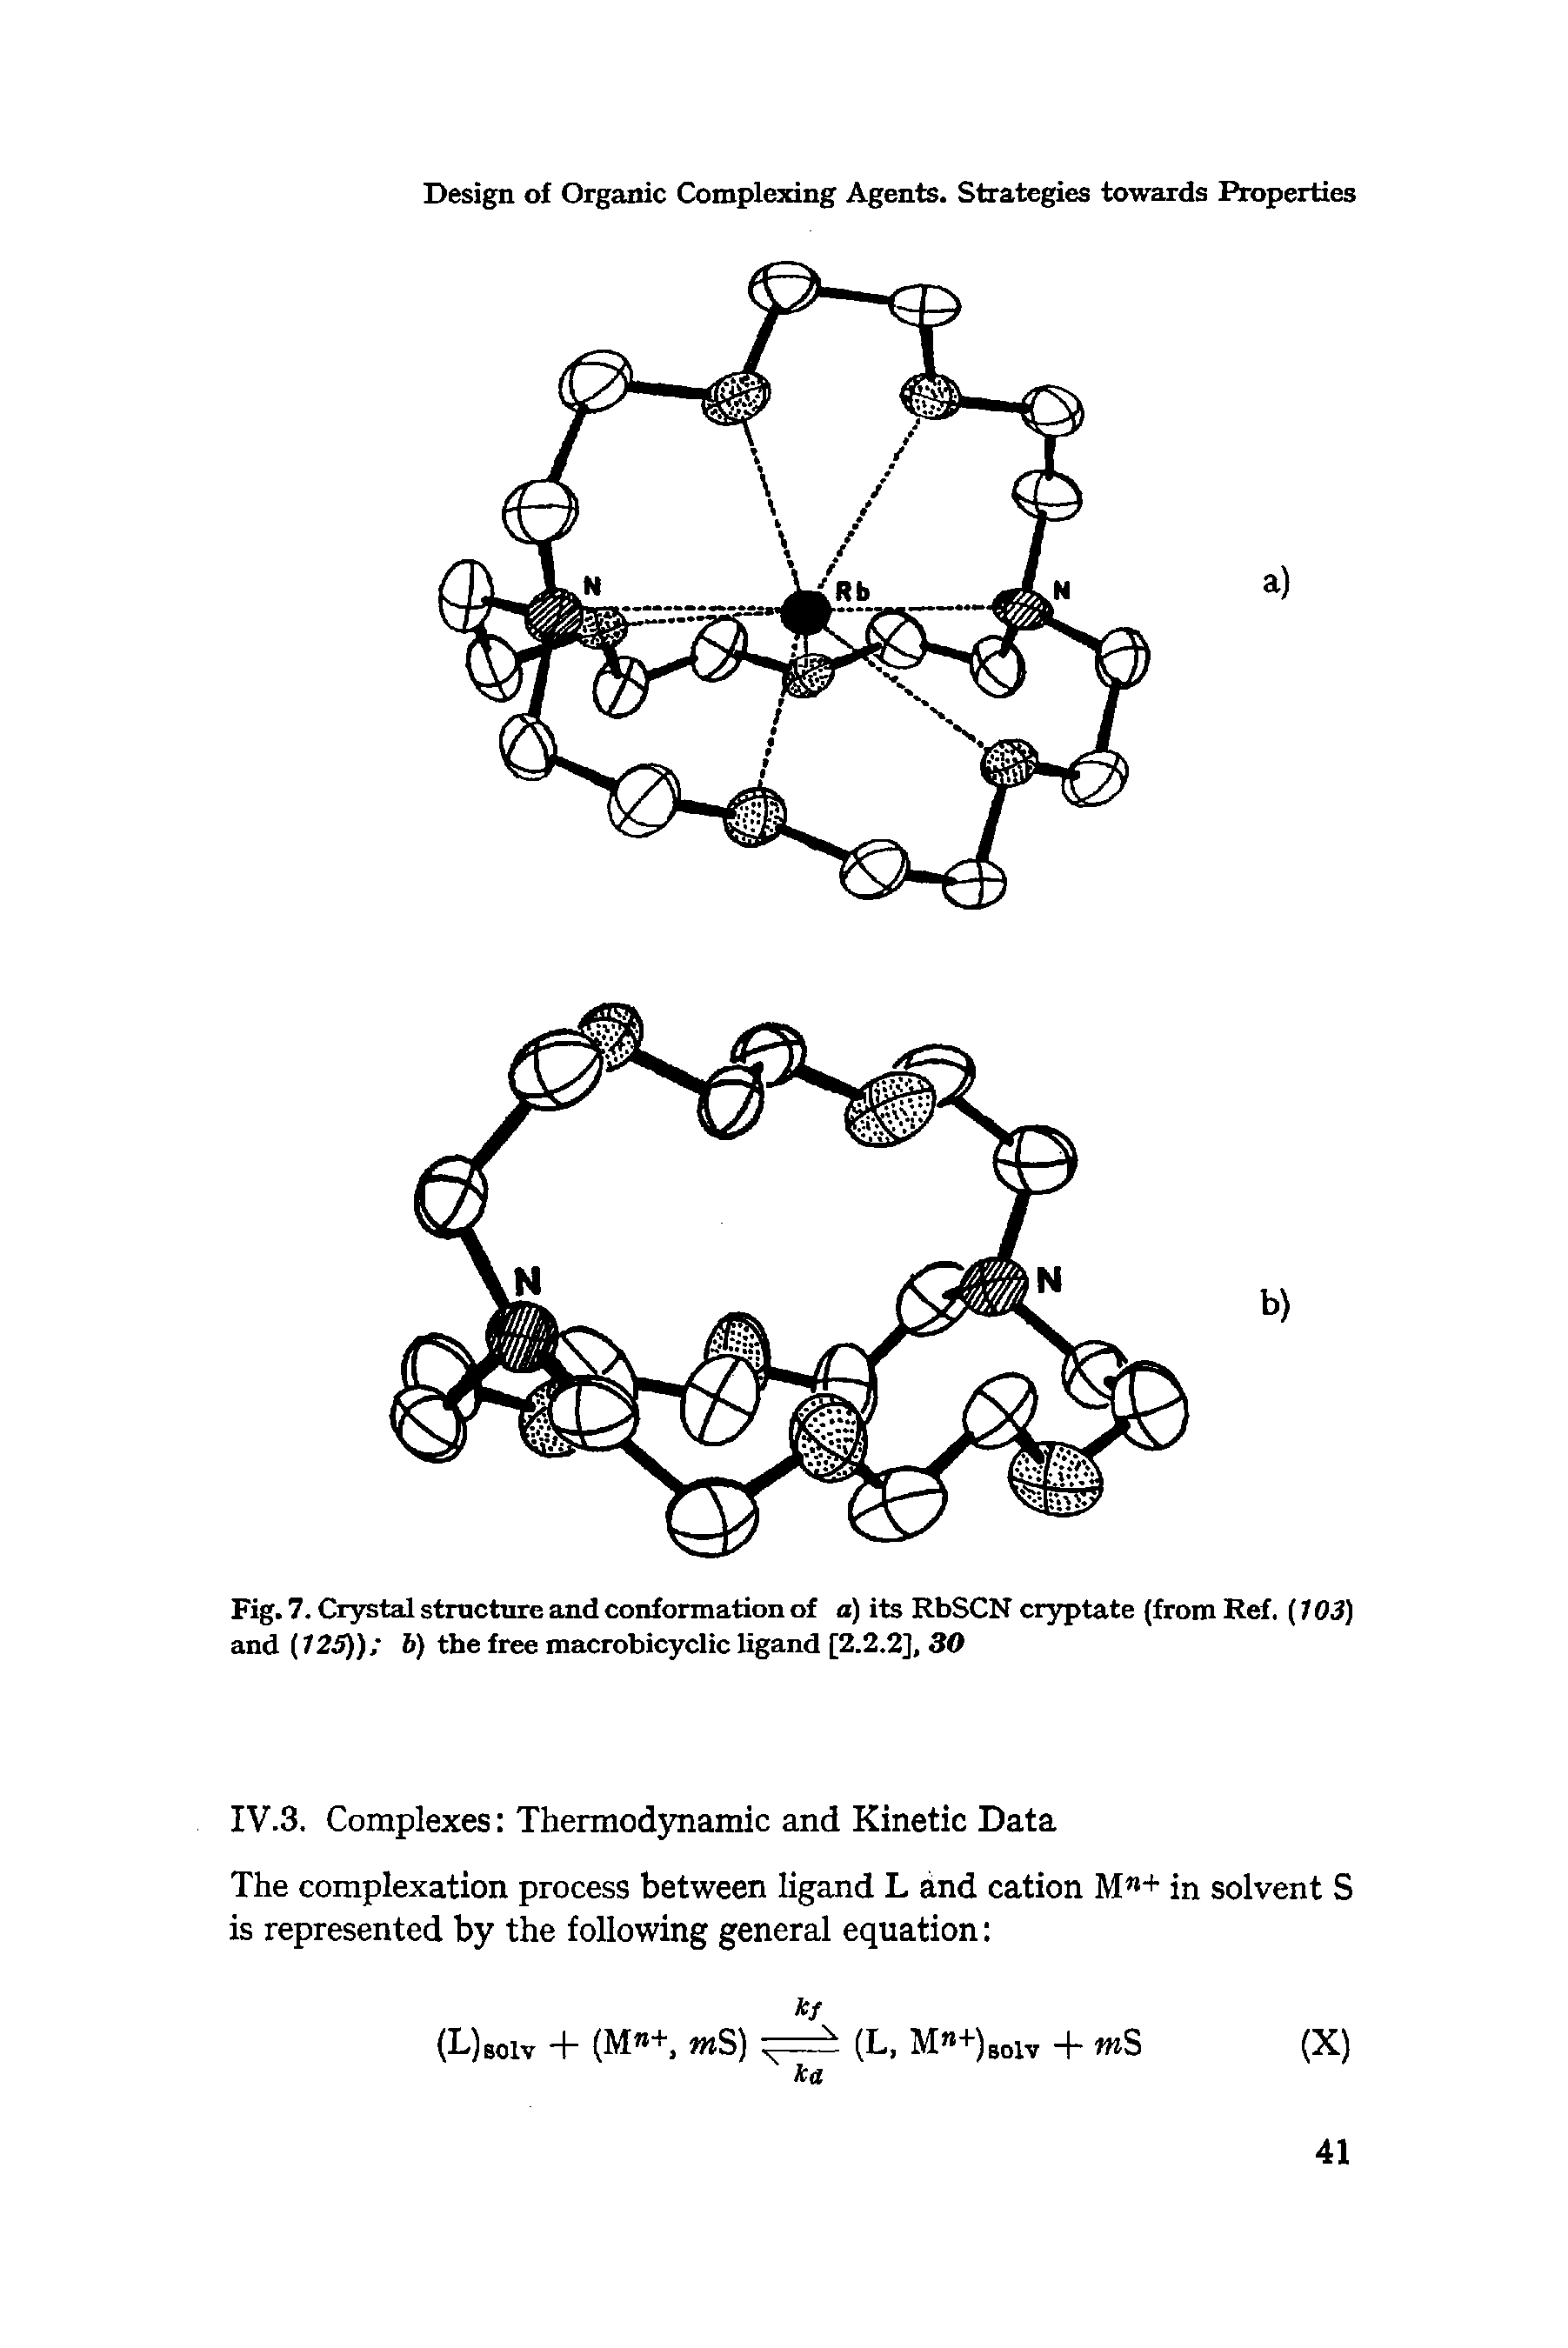 Fig. 7. Crystal structure and conformation of a) its RbSCN cryptate (from Ref. (103) and (125)) b) the free macrobicyclic ligand [2.2.2], 30...